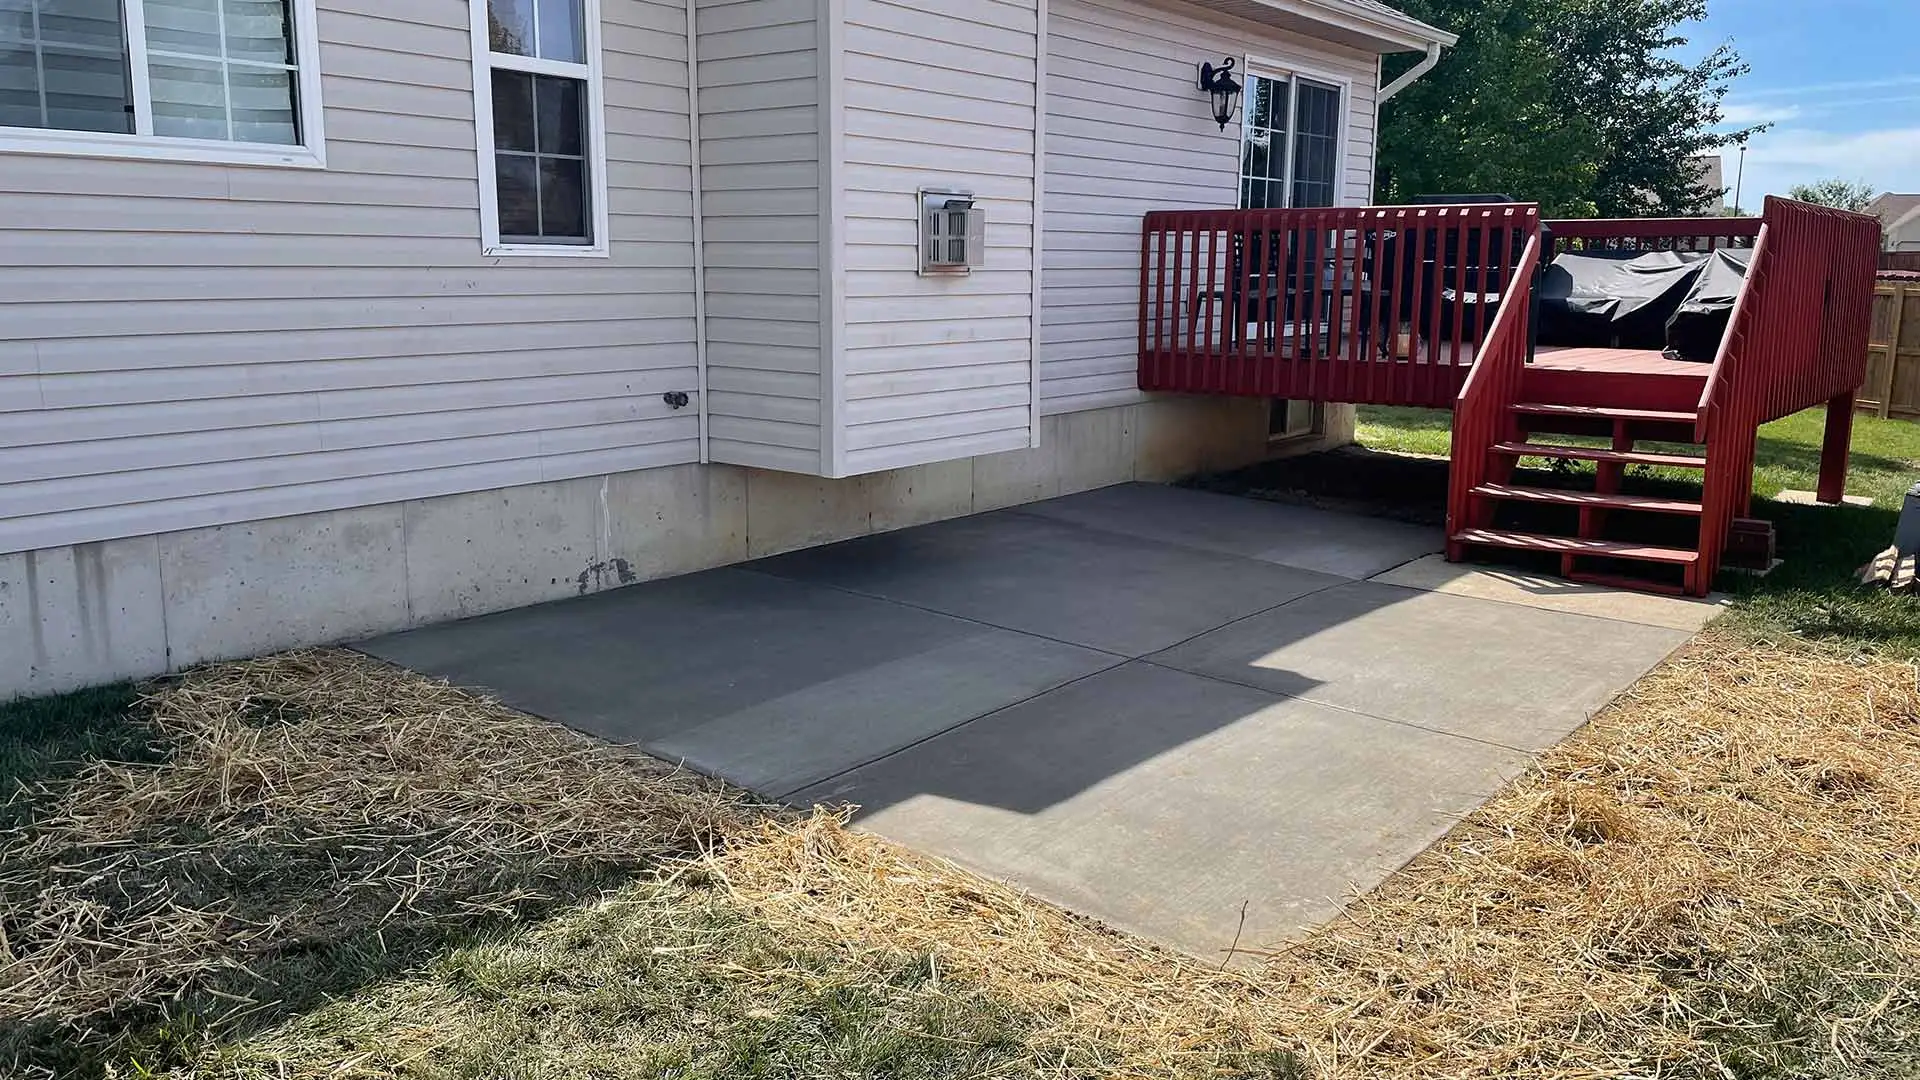 Concrete patio installed for clients in Edwardsville, IL.